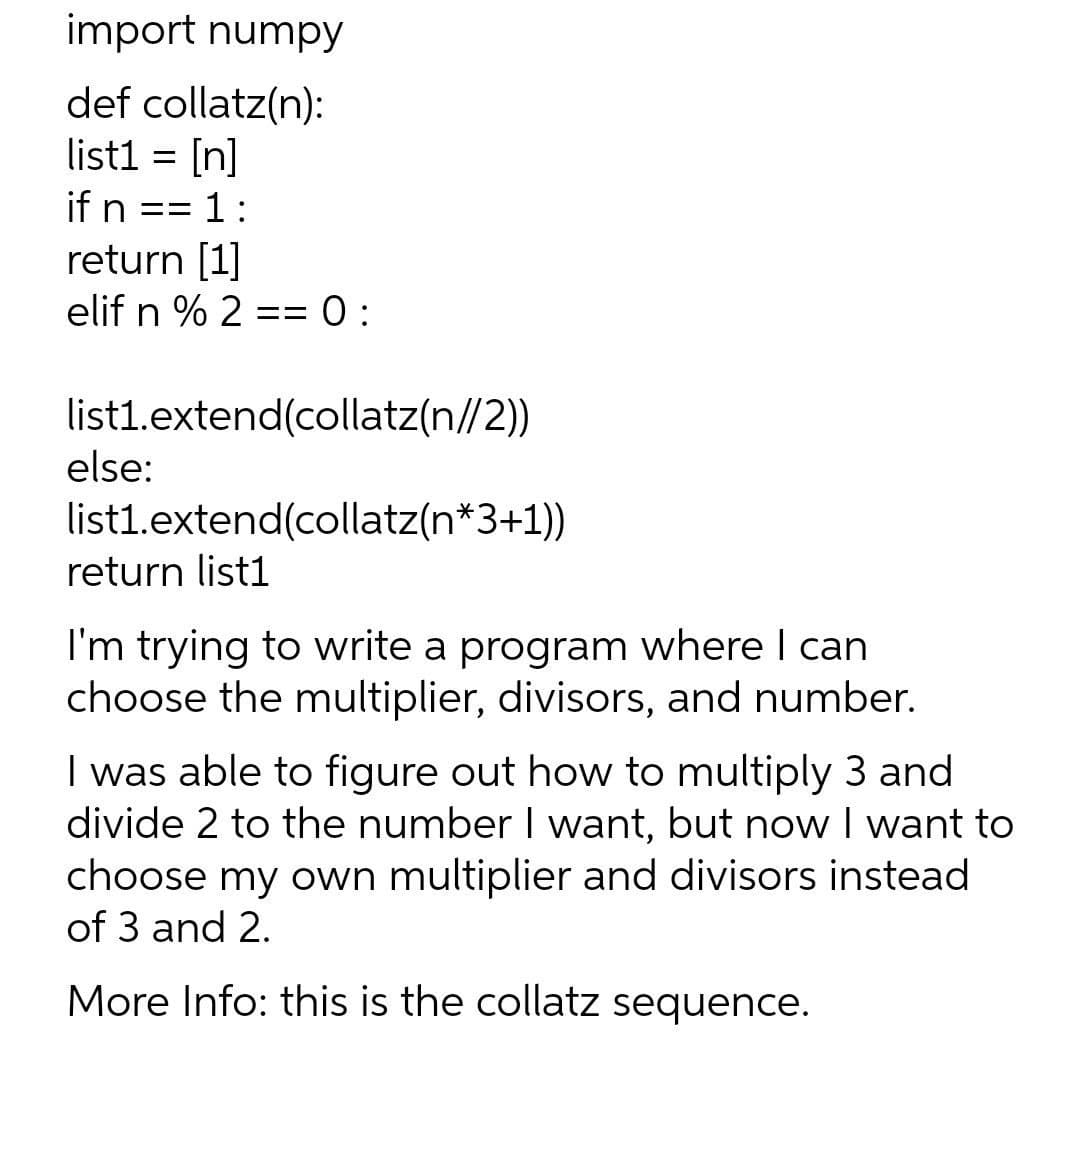 import numpy
def collatz(n):
list1 = [n]
if n == 1:
return [1]
elif n % 2 == 0:
=%3D
0 :
list1.extend(collatz(n//2))
else:
list1.extend(collatz(n*3+1)
return list1
I'm trying to write a program where I can
choose the multiplier, divisors, and number.
I was able to figure out how to multiply 3 and
divide 2 to the number I want, but now I want to
choose my own multiplier and divisors instead
of 3 and 2.
More Info: this is the collatz sequence.
